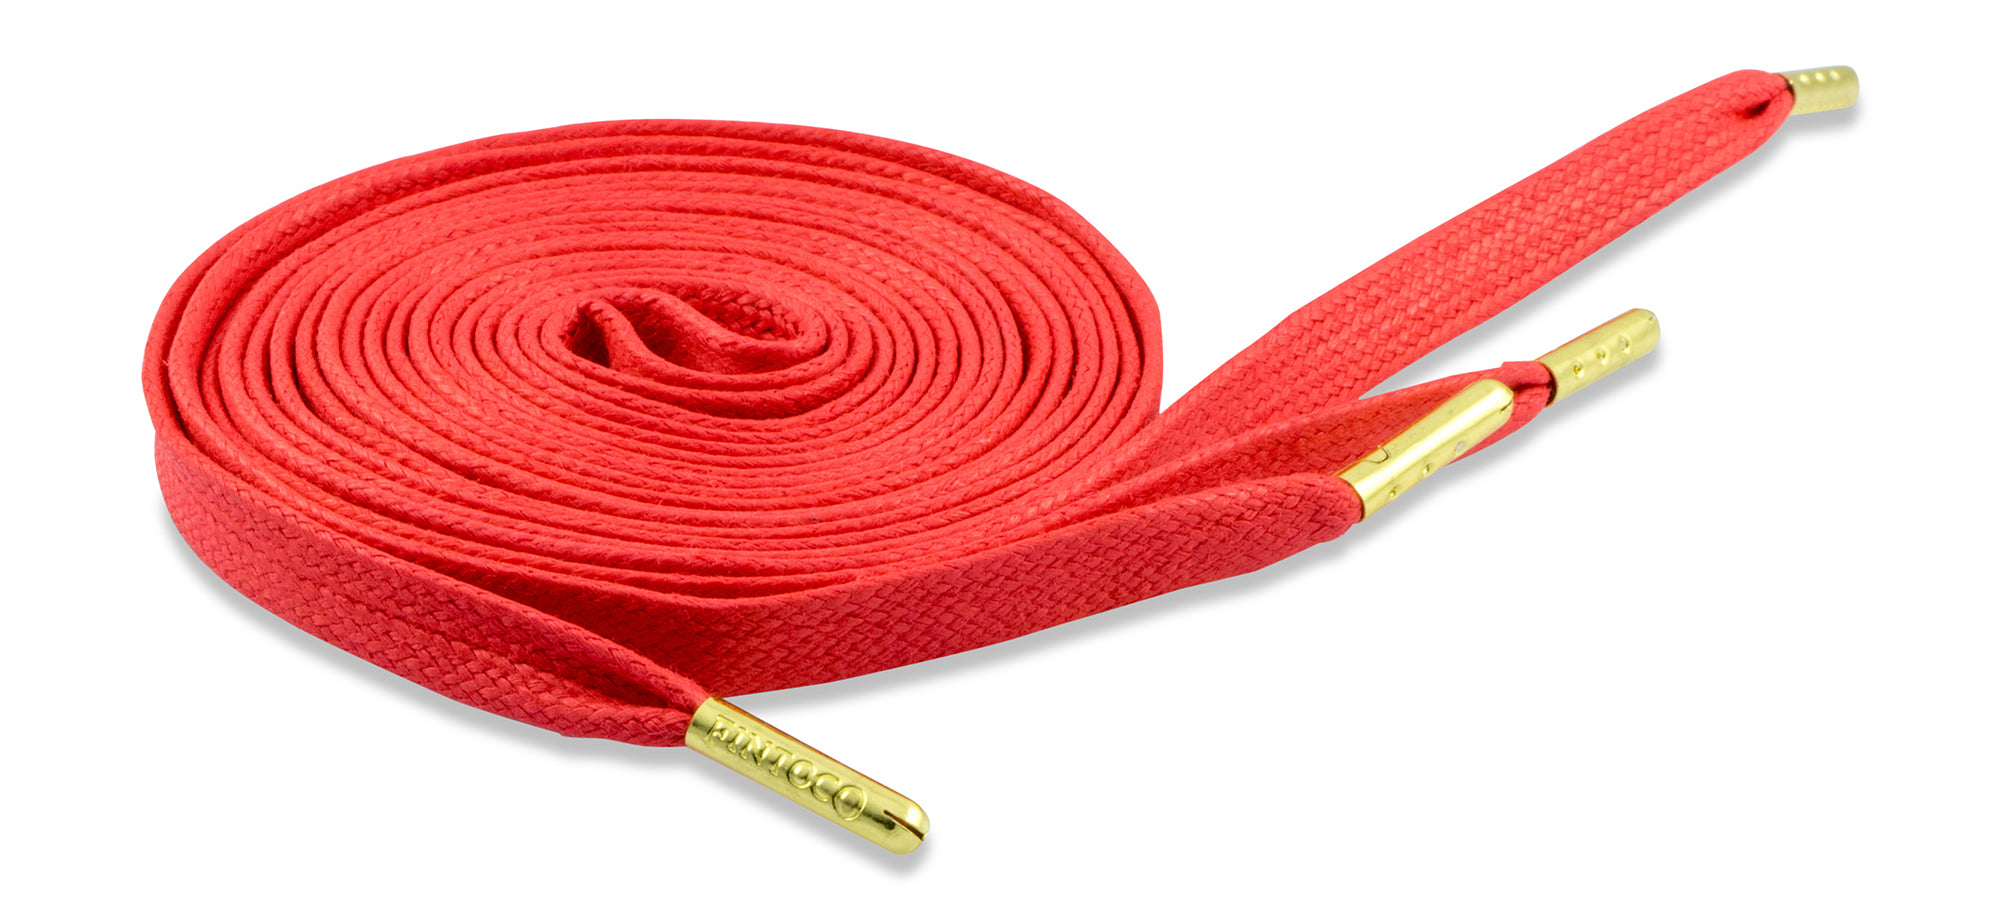 Buy Red and Black Shoelaces: Premium Laces + Gold Tips